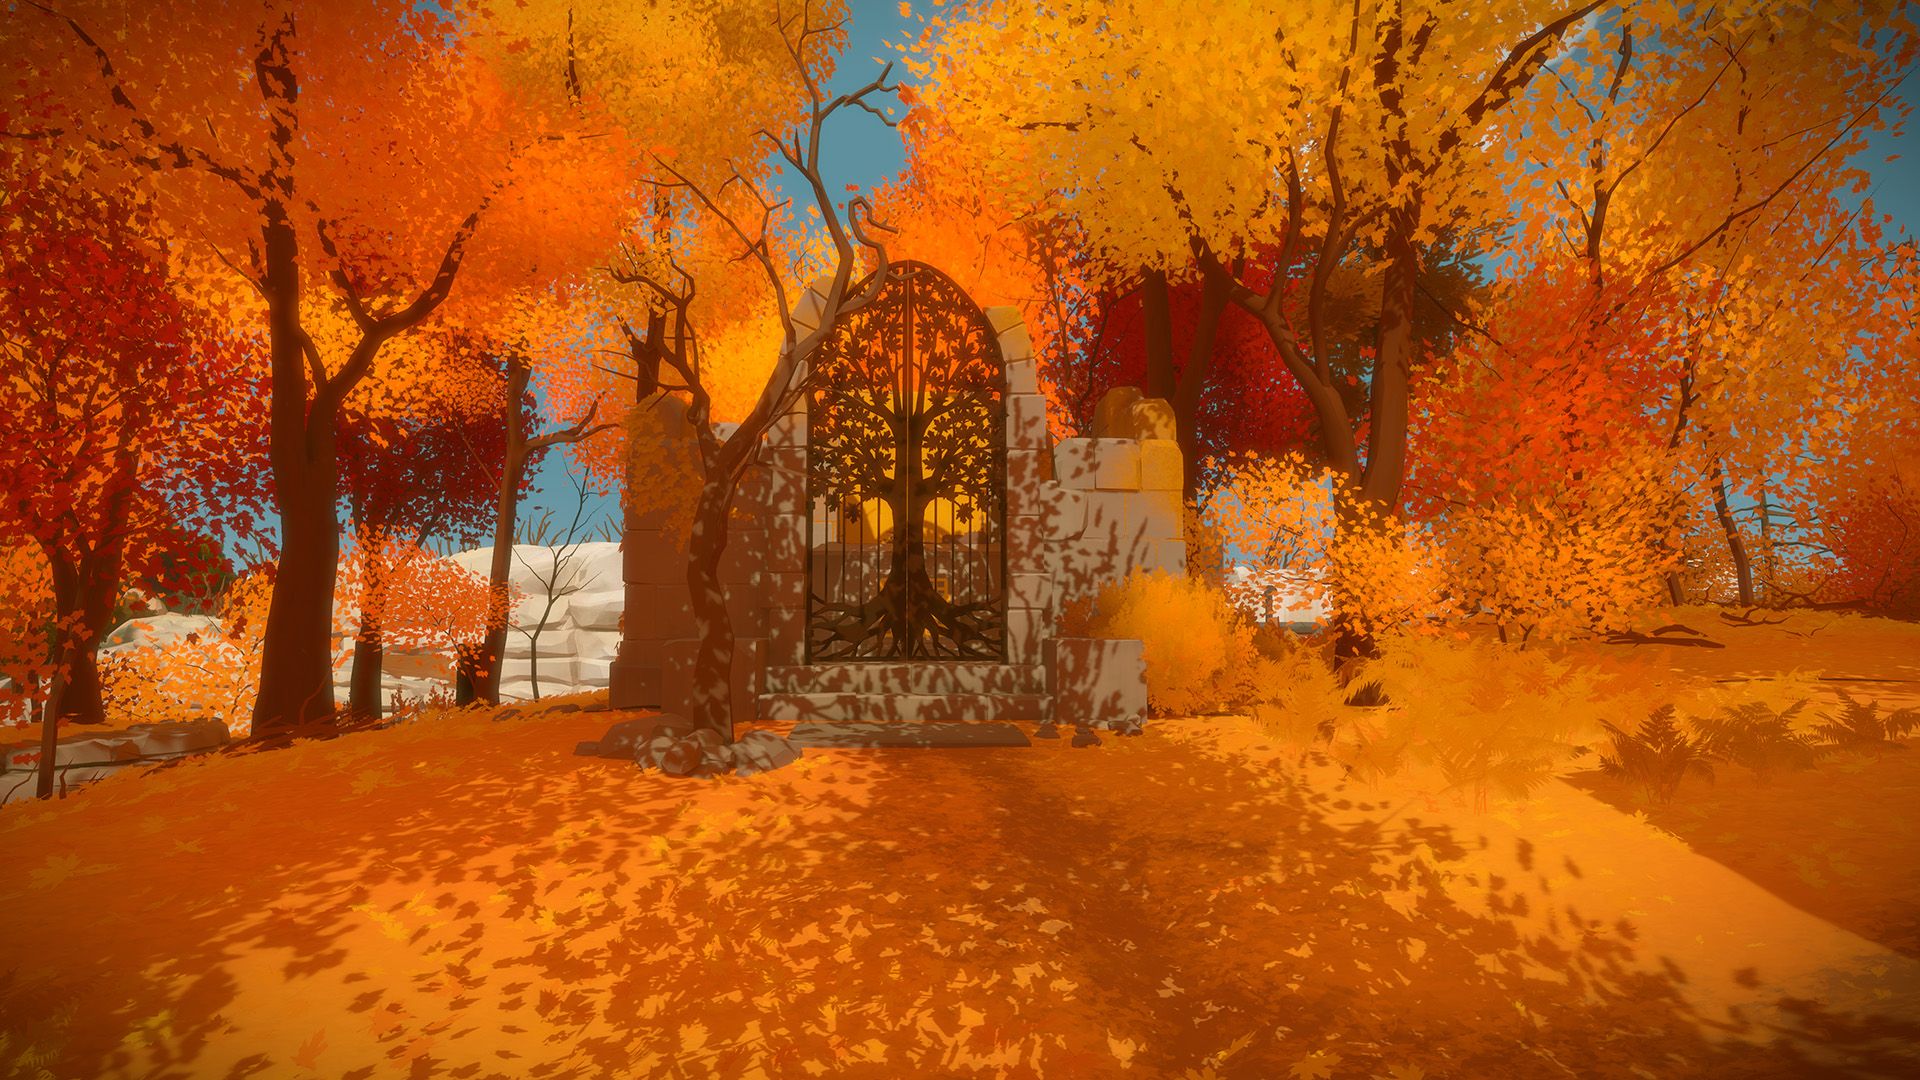 the witness game